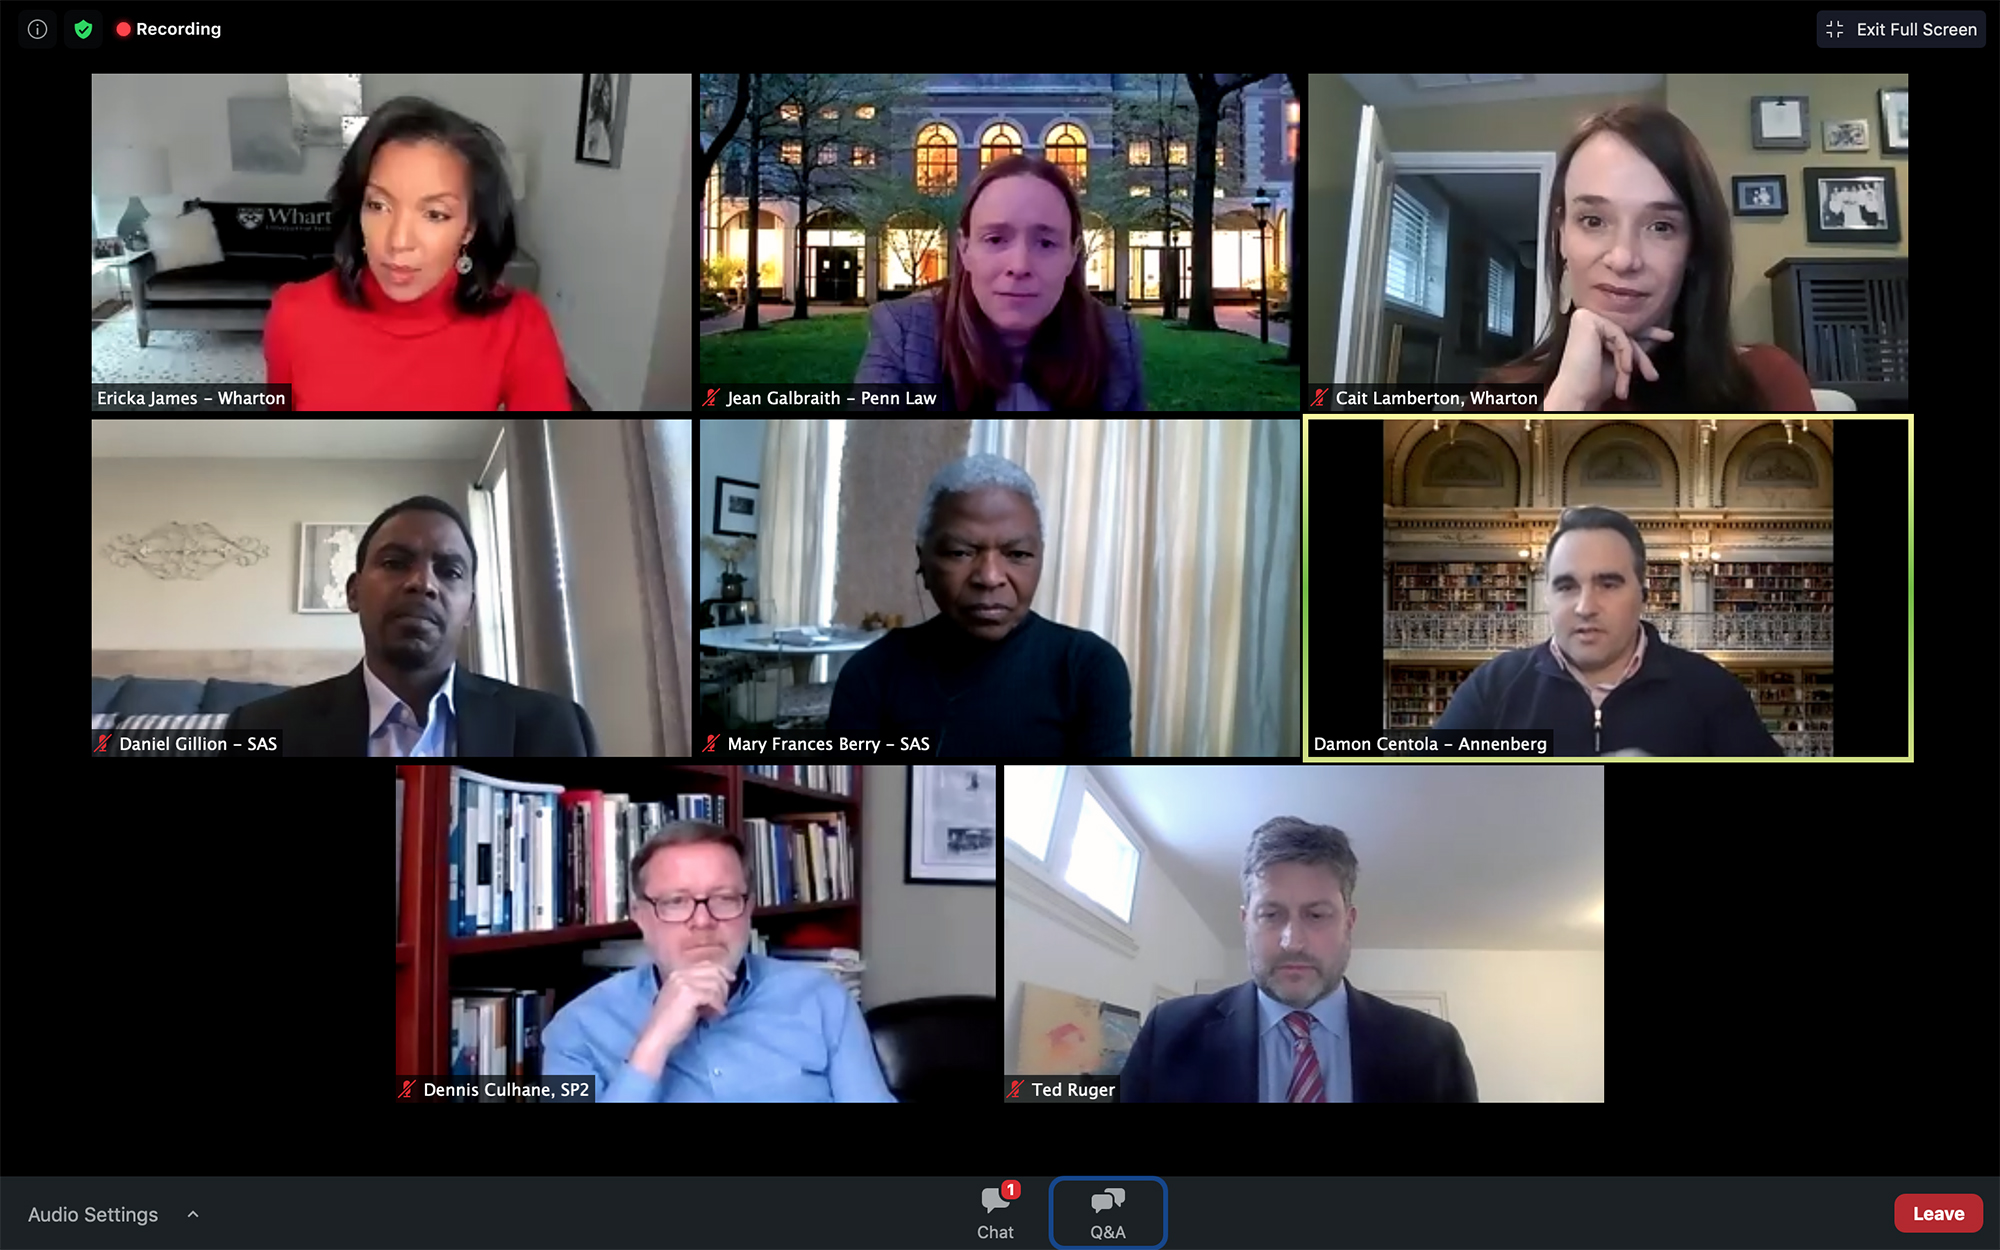 Screen shot of discussion, top row: Erika James, Jean Galbraith, and Cait Lamberton. Middle row: Daniel Gillion, Mary Frances Berry, and Damon Centola. Bottom row: Dennis Culhane, and Ted Ruger. 